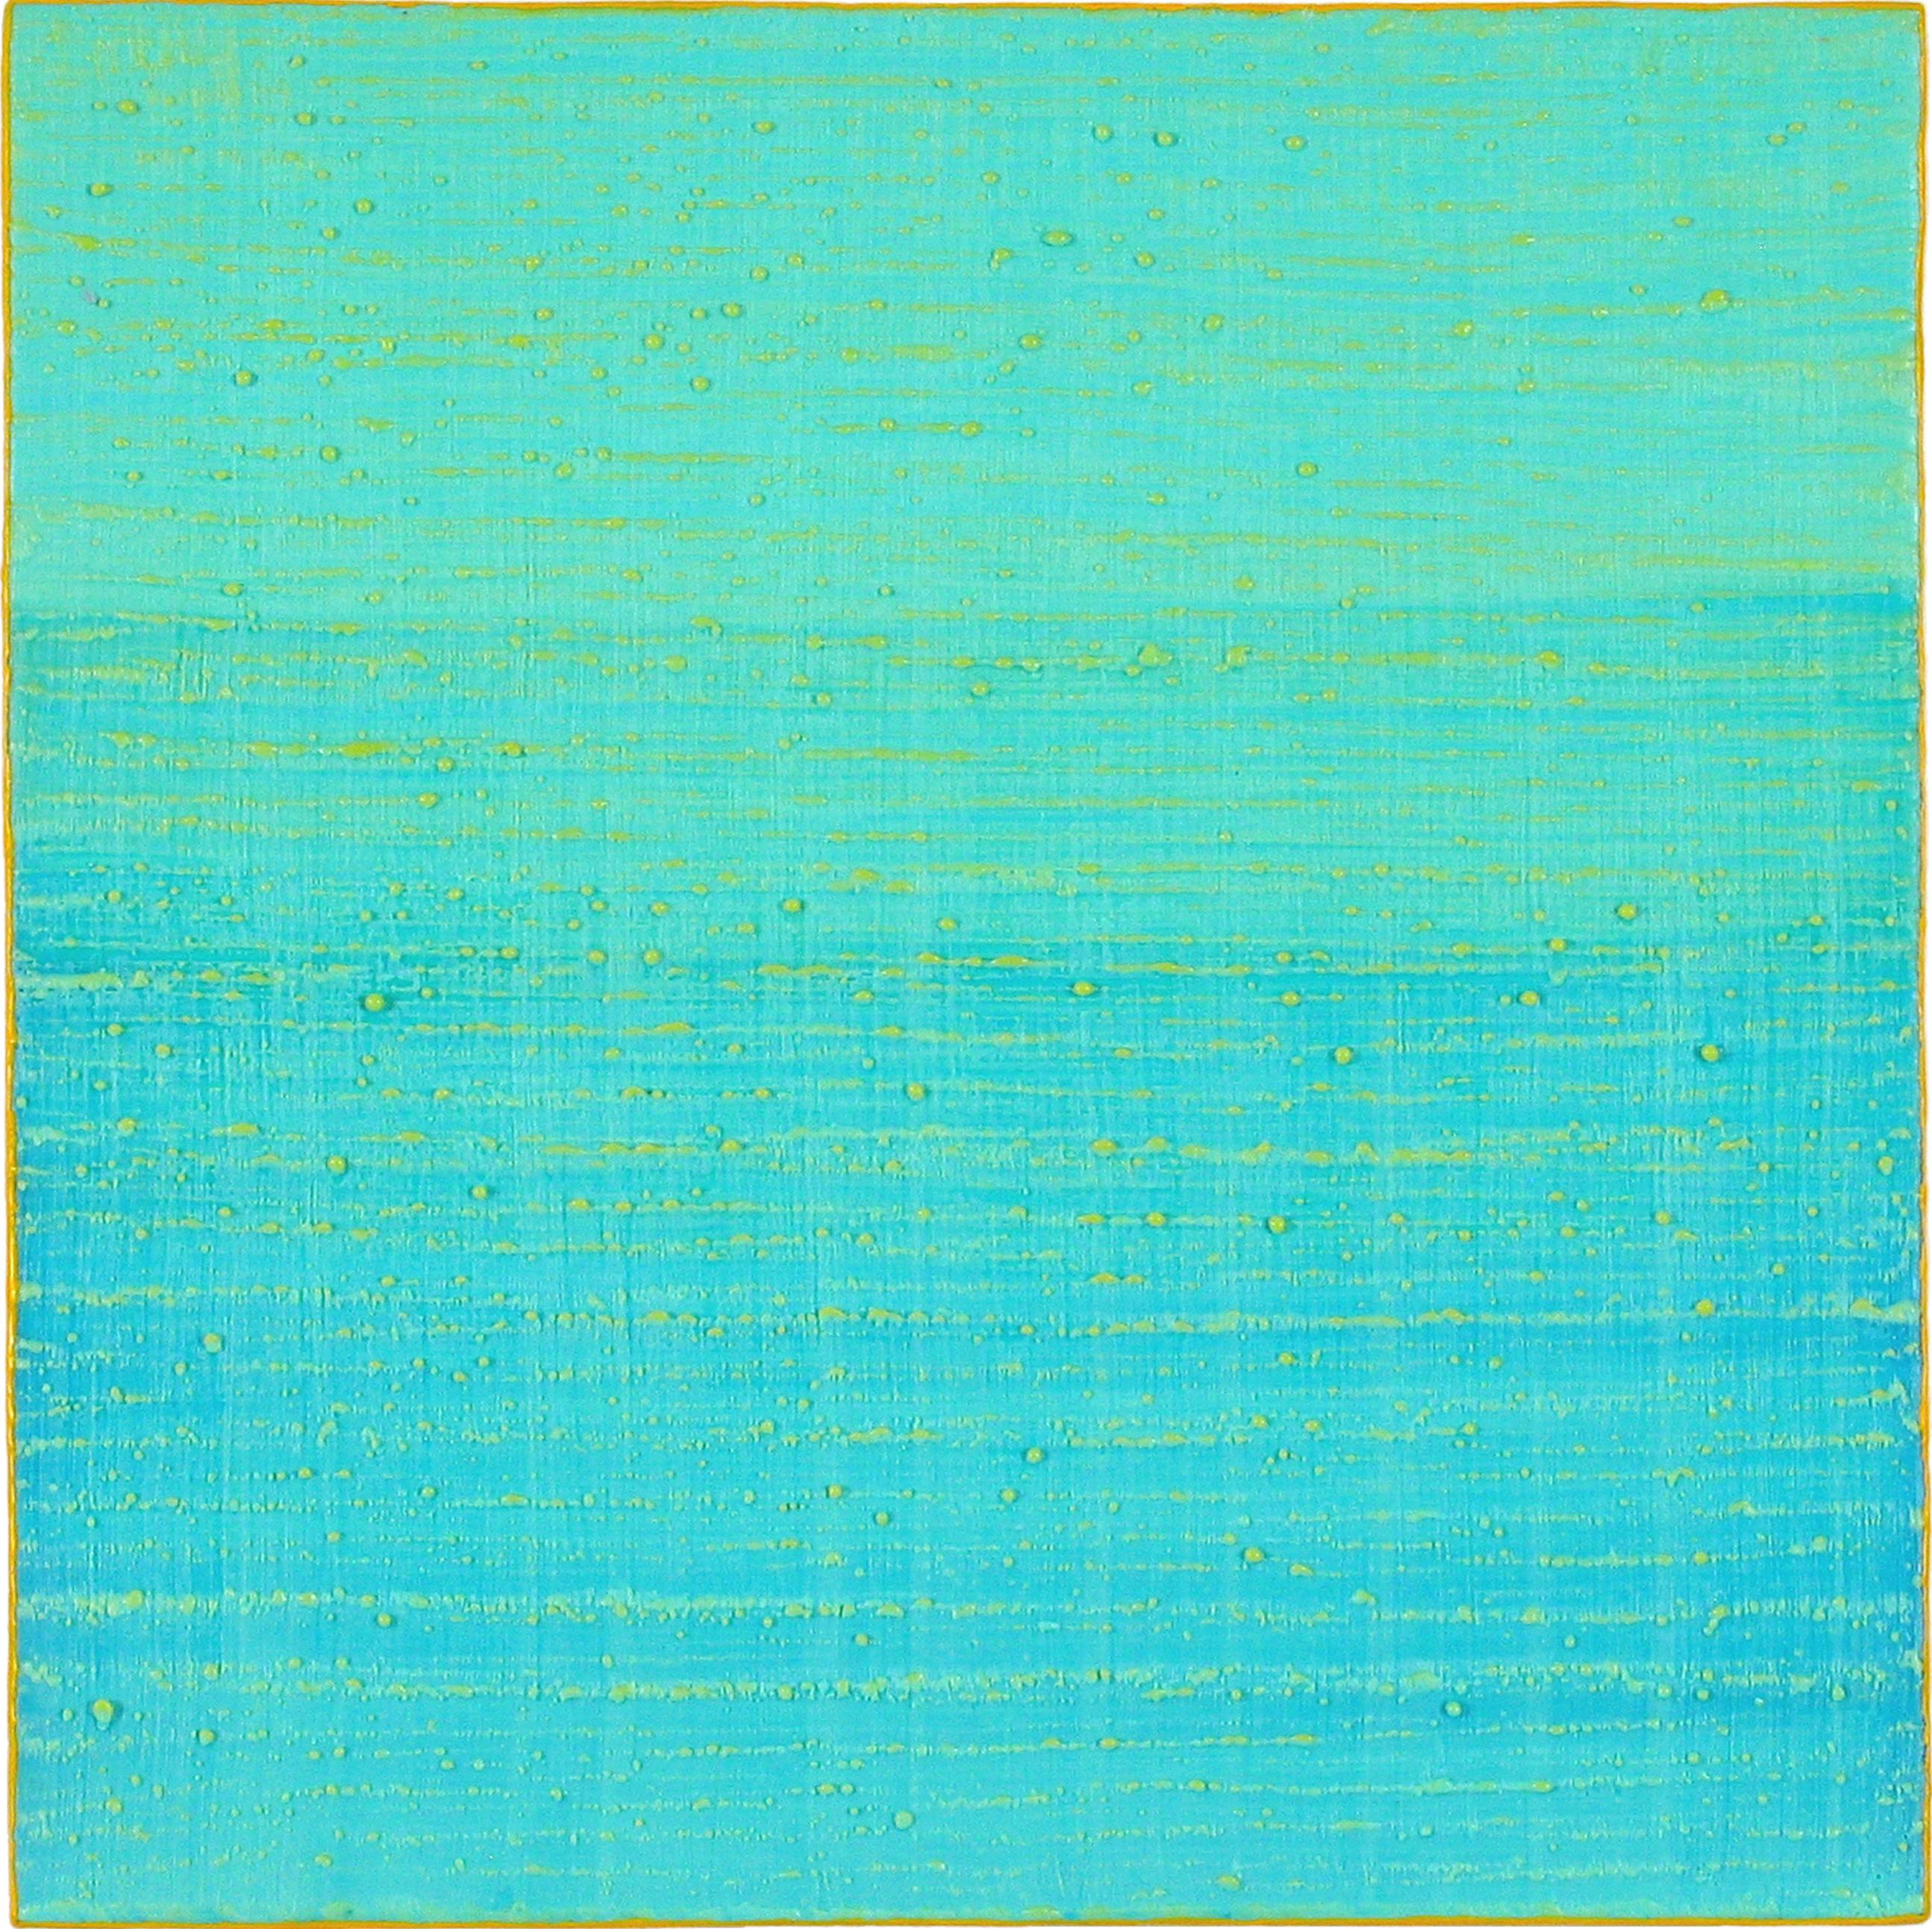 This is a vibrant teal blue and light green encaustic (pigmented beeswax) painting on birch panel is accented with luminous lime green details along the edge. Signed, dated and titled on verso.

Joanne Mattera’s paintings can be described as lush